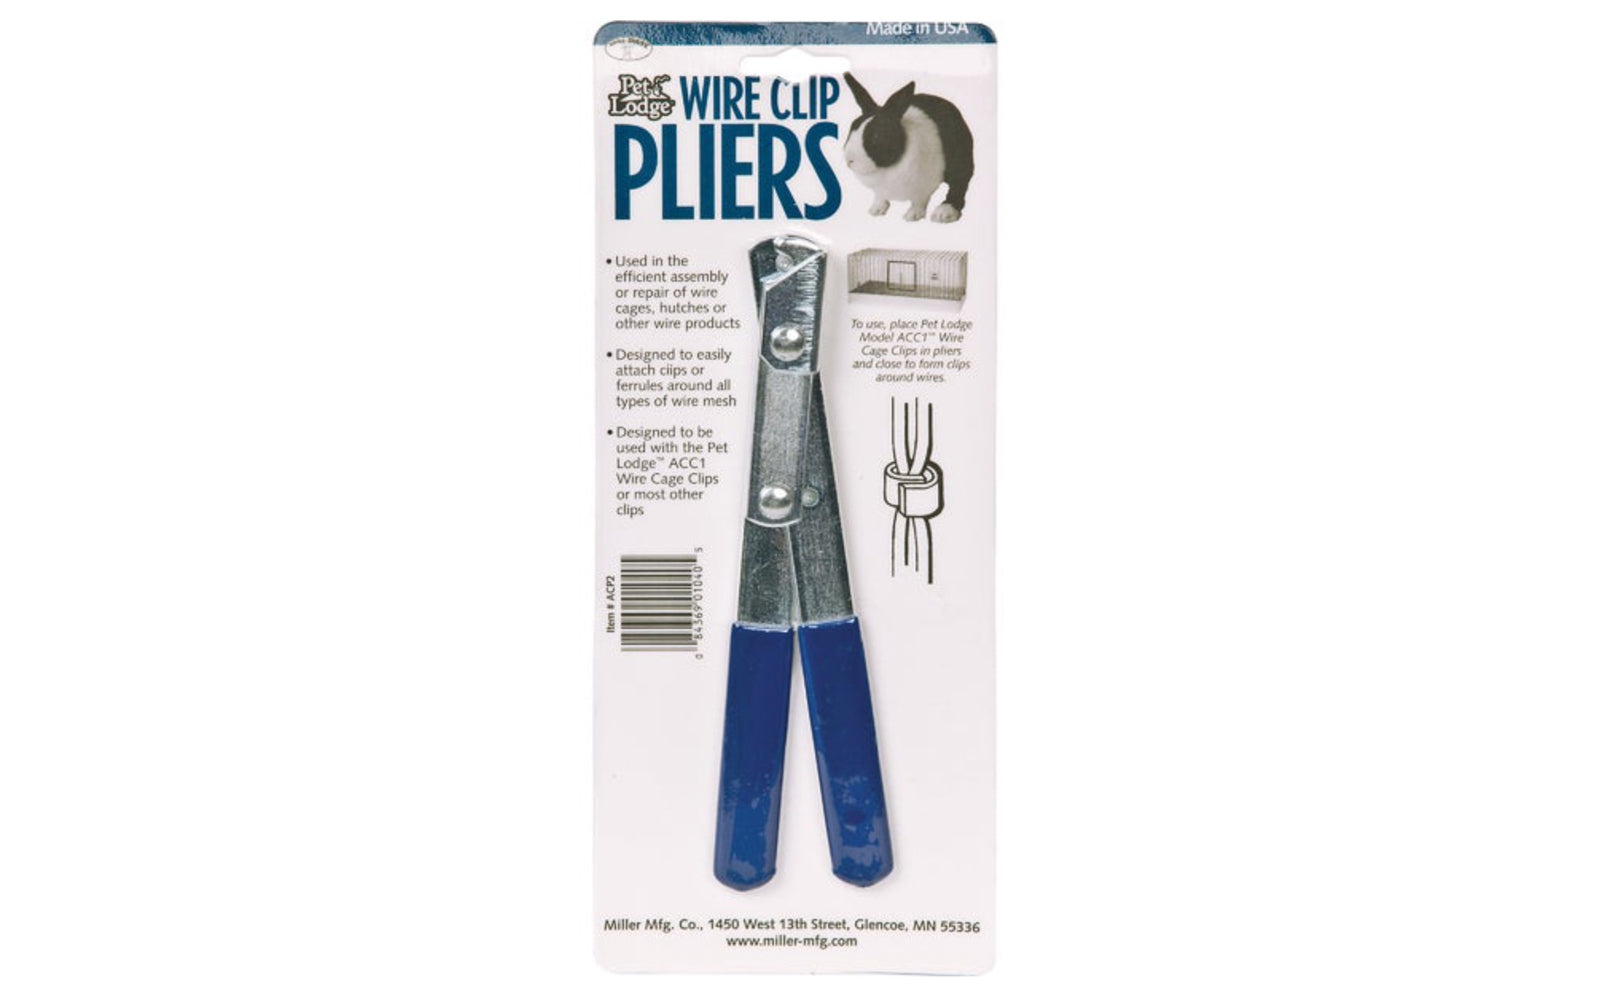 These Metal Wire Cage Clip Pliers are used to assemble or repair wire cages, hutches, or other wire products. Designed to easily attach clips or ferrules around all types of wire mesh. Designed to use with Pet Lodge ACC1 wire cage clips or most other clips.  Made in USA. 084369010405